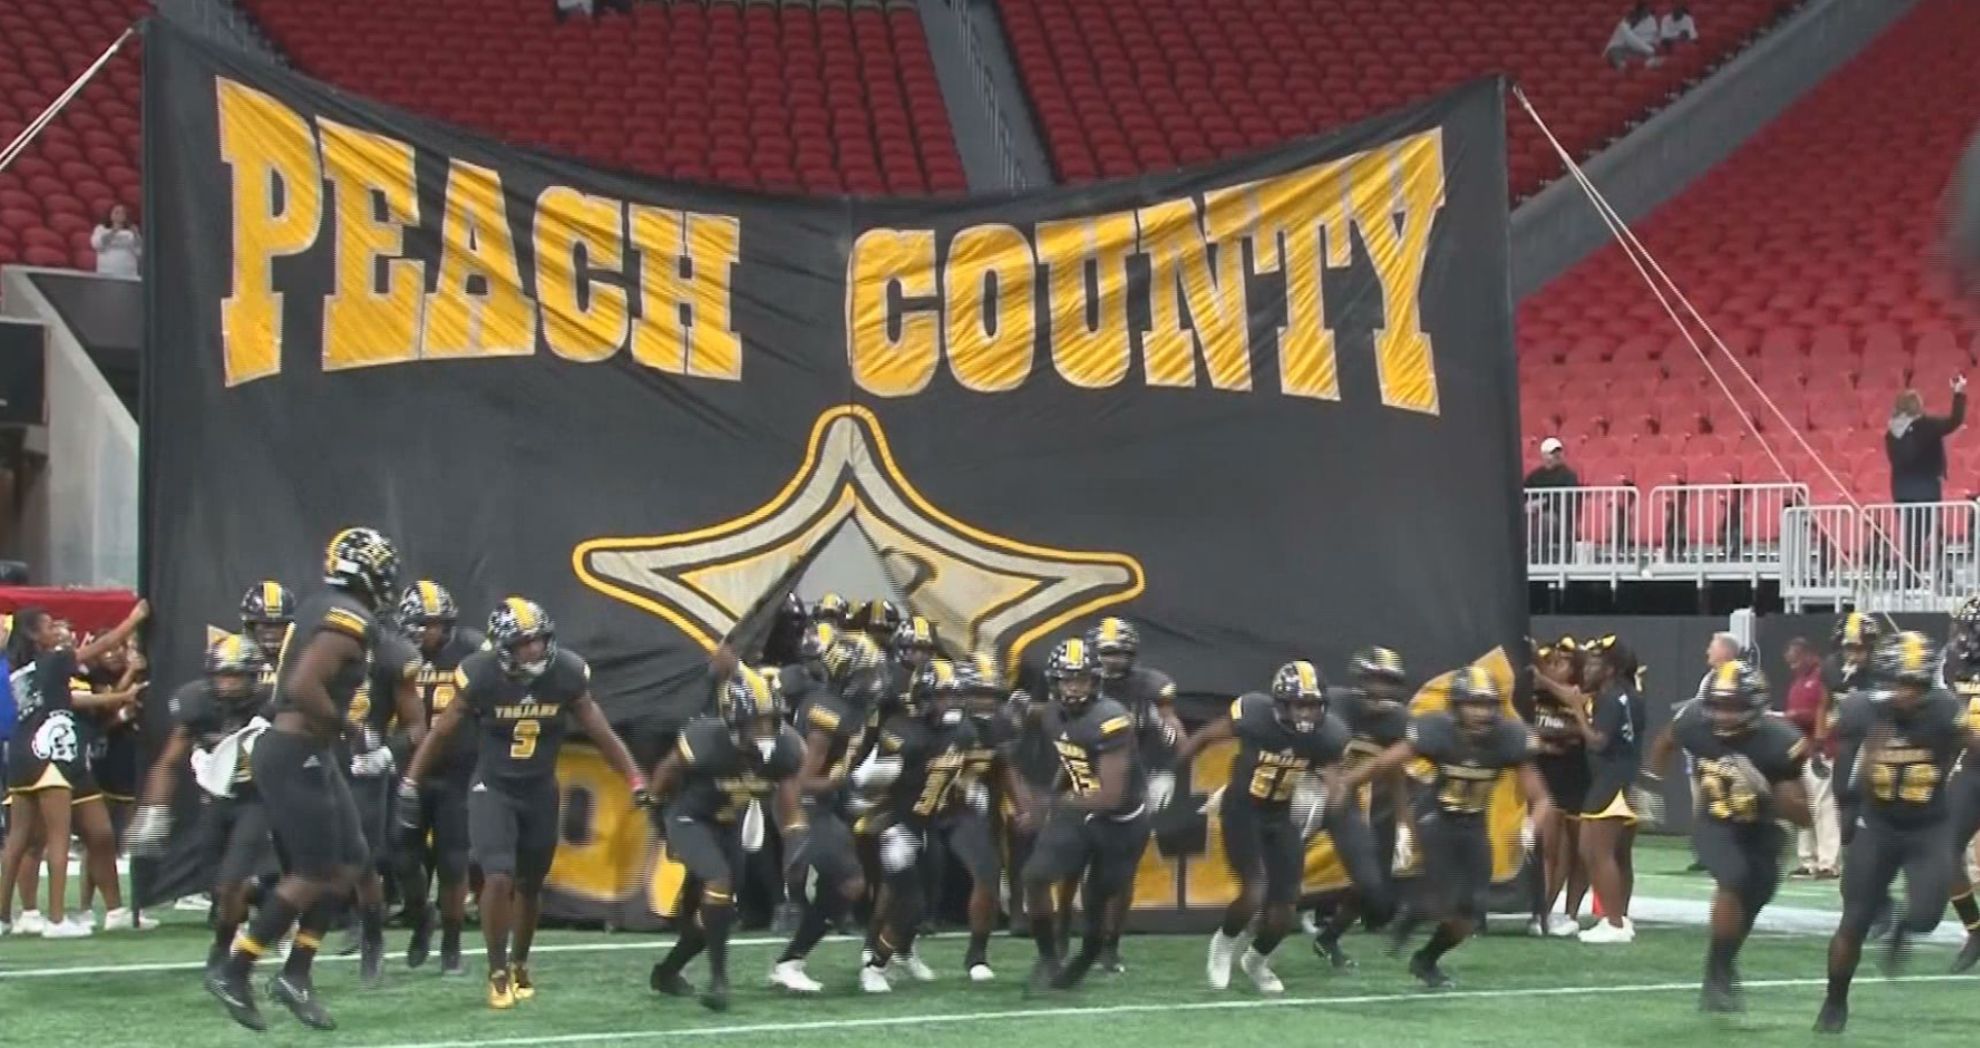 Peach County Trojans have established a tradition for excellence